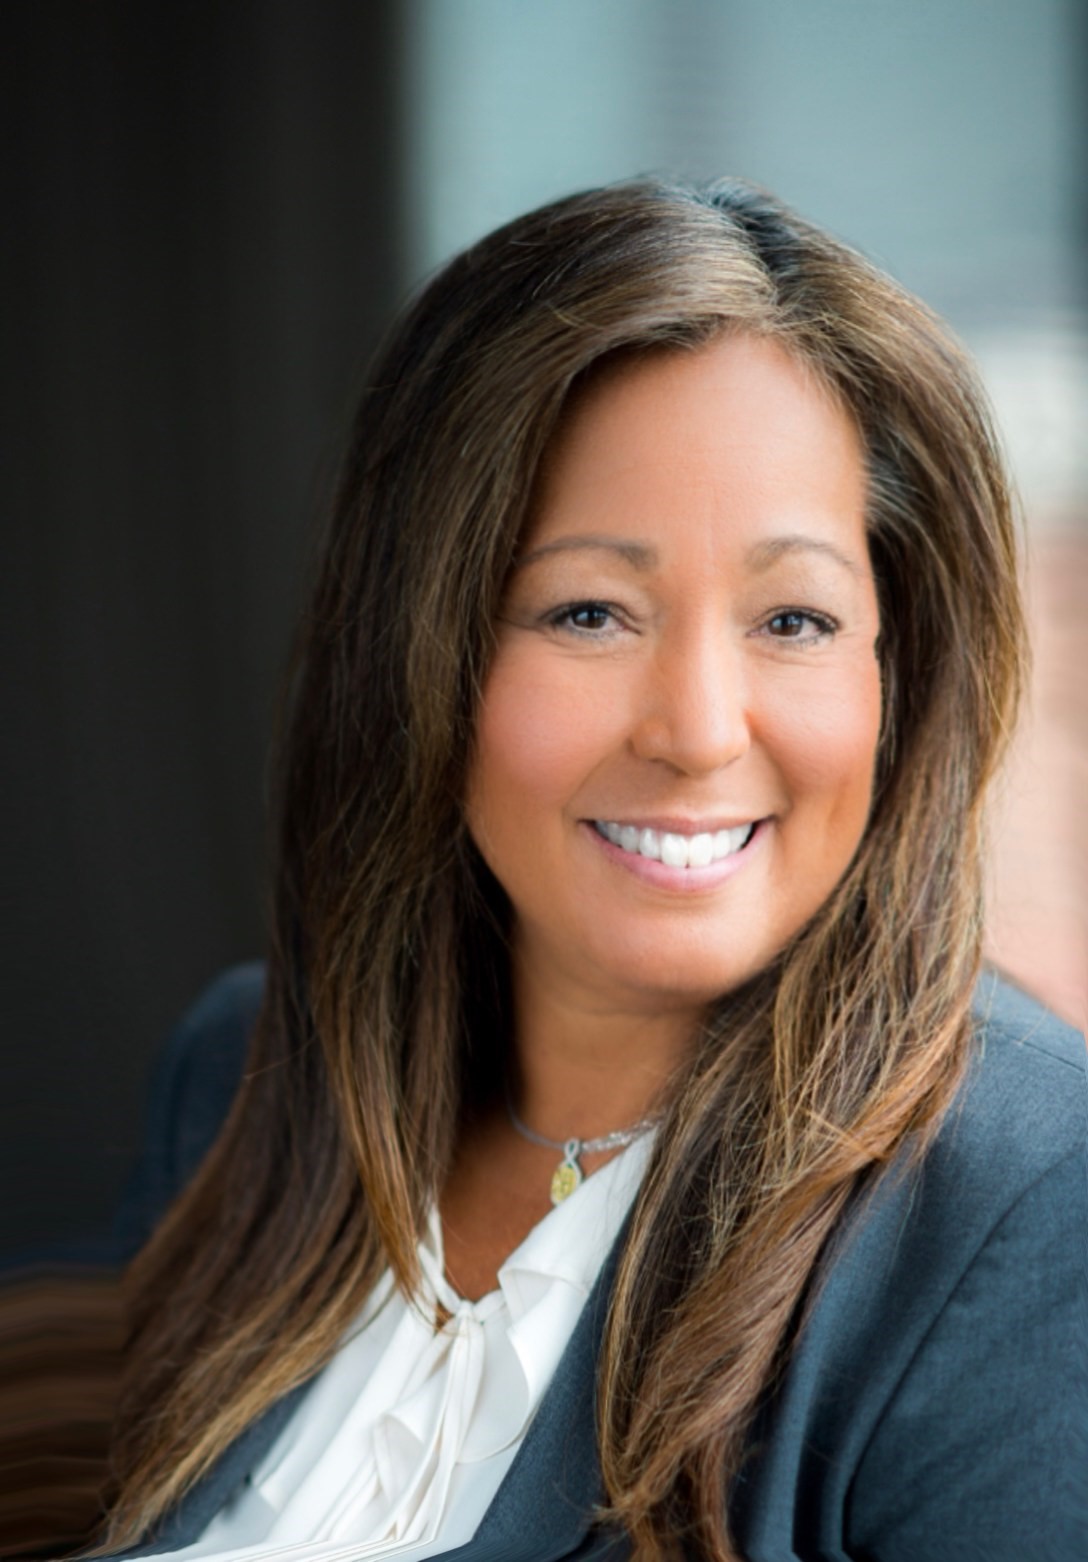 Five Questions with Senior Vice President of Human Resources Shelley Roither